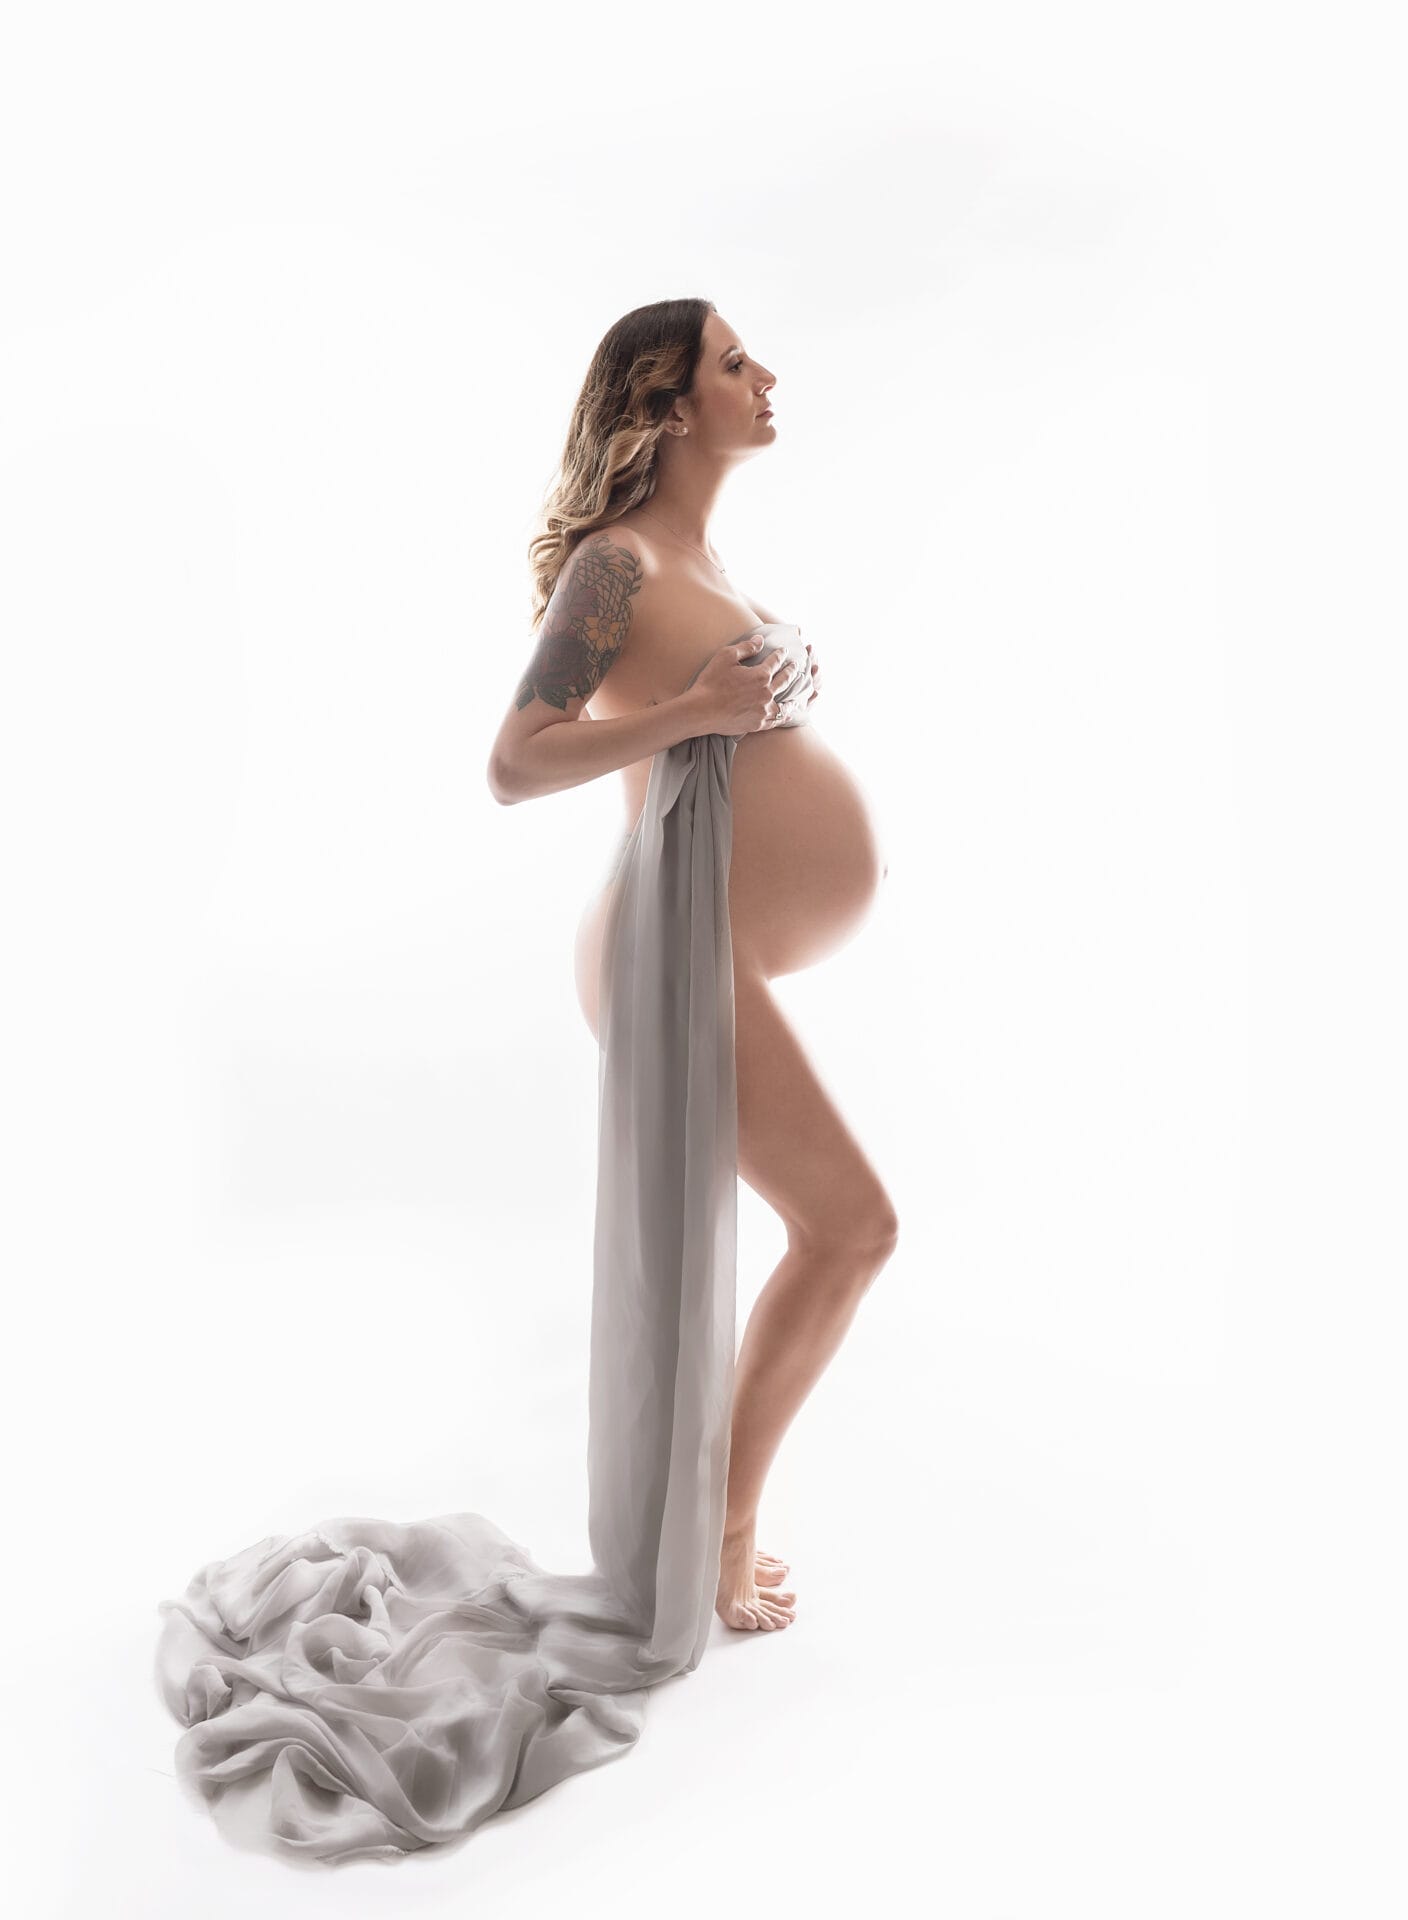 A pregnant mom in the studio with fabric draped around her body and her pregnant belly exposed. 